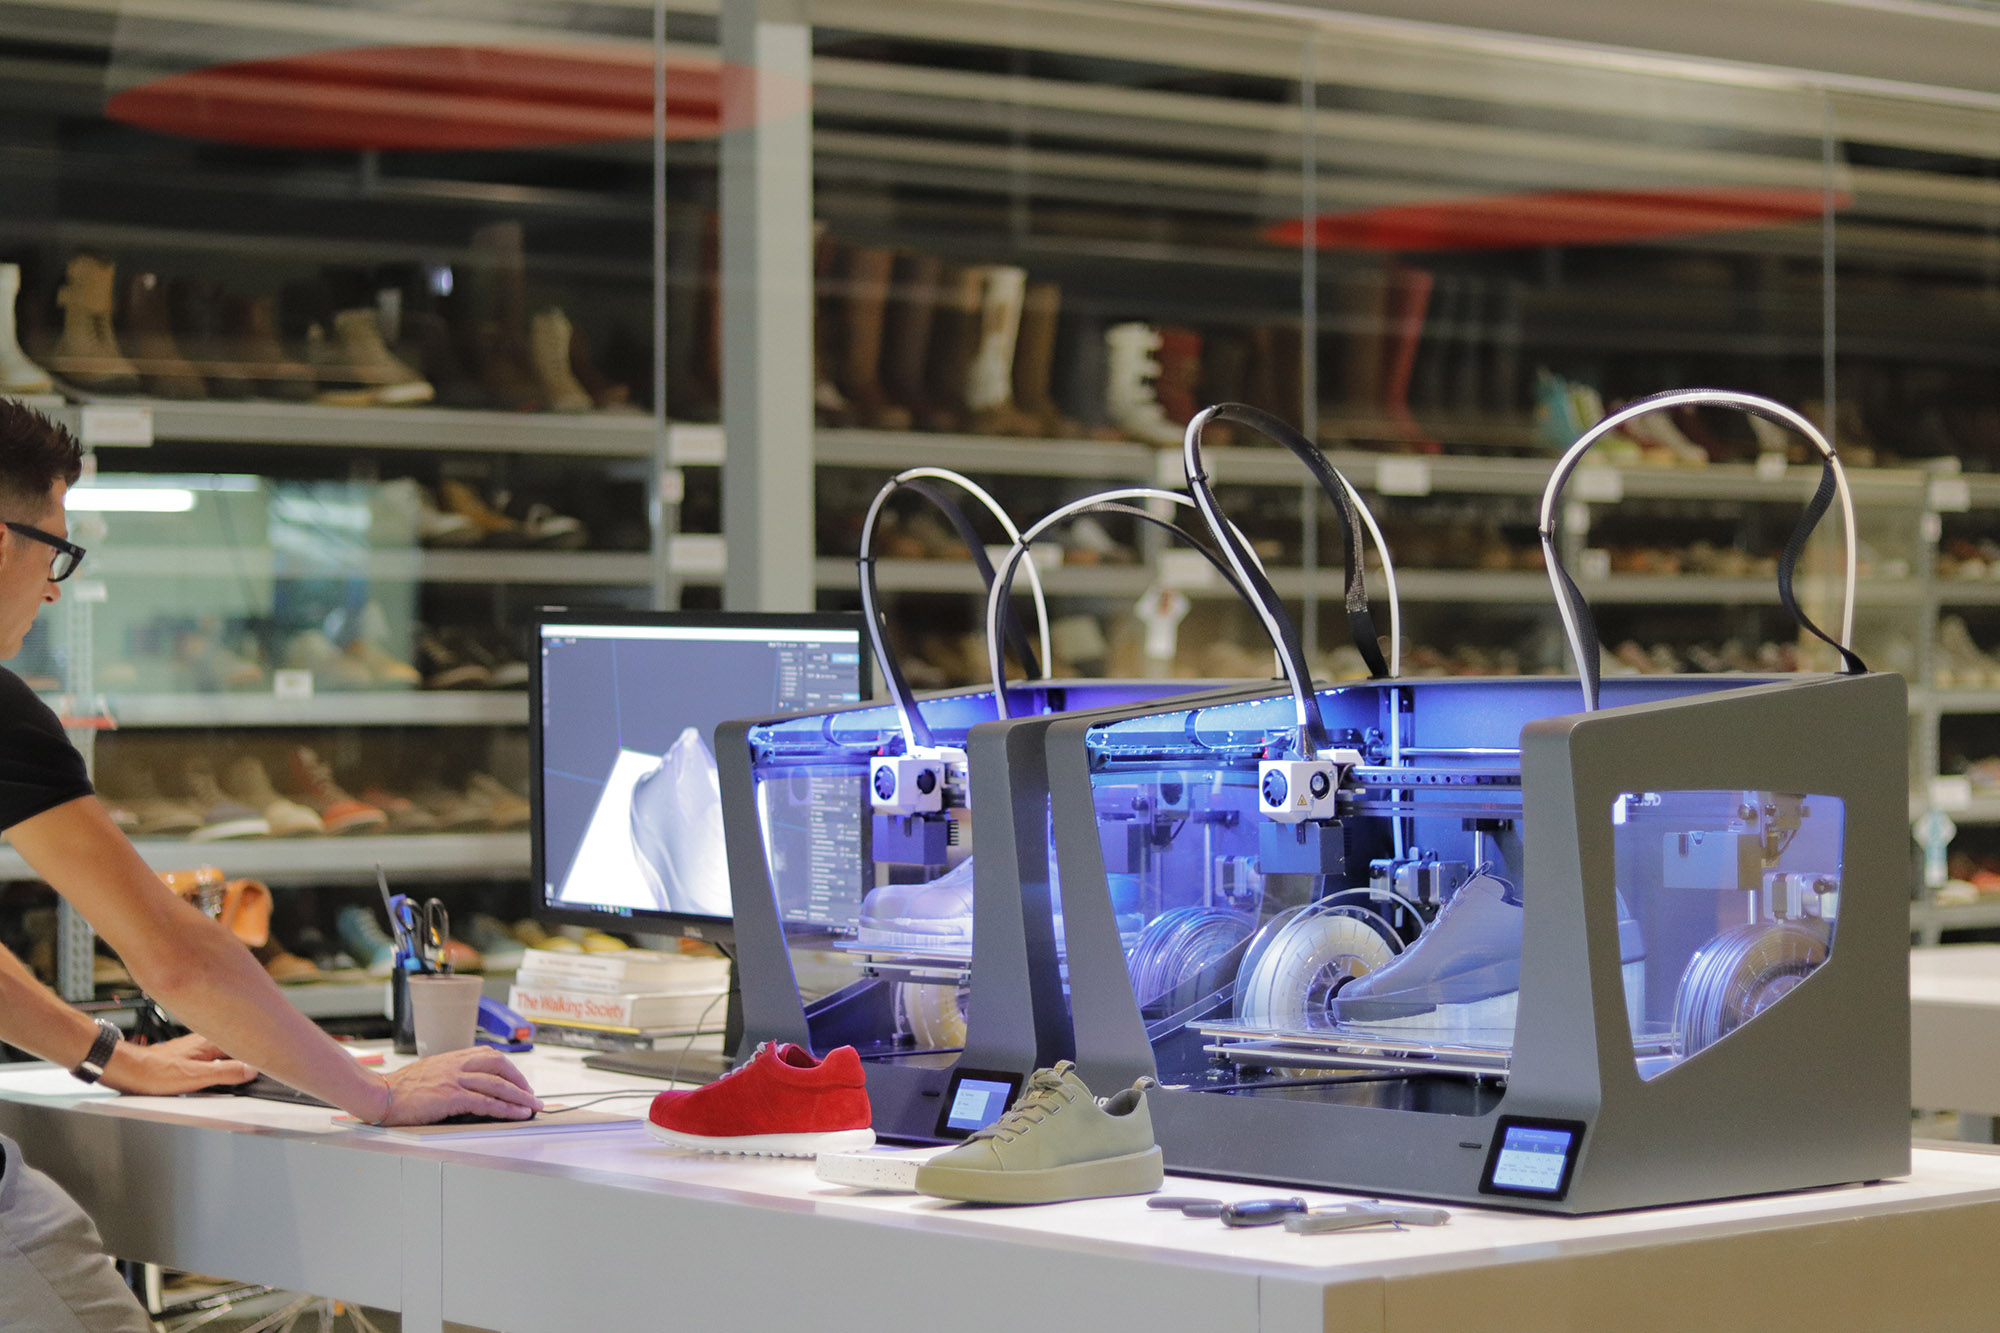 Danobatgroup invests in the BCN3D start-up in order to diversify its technological offer